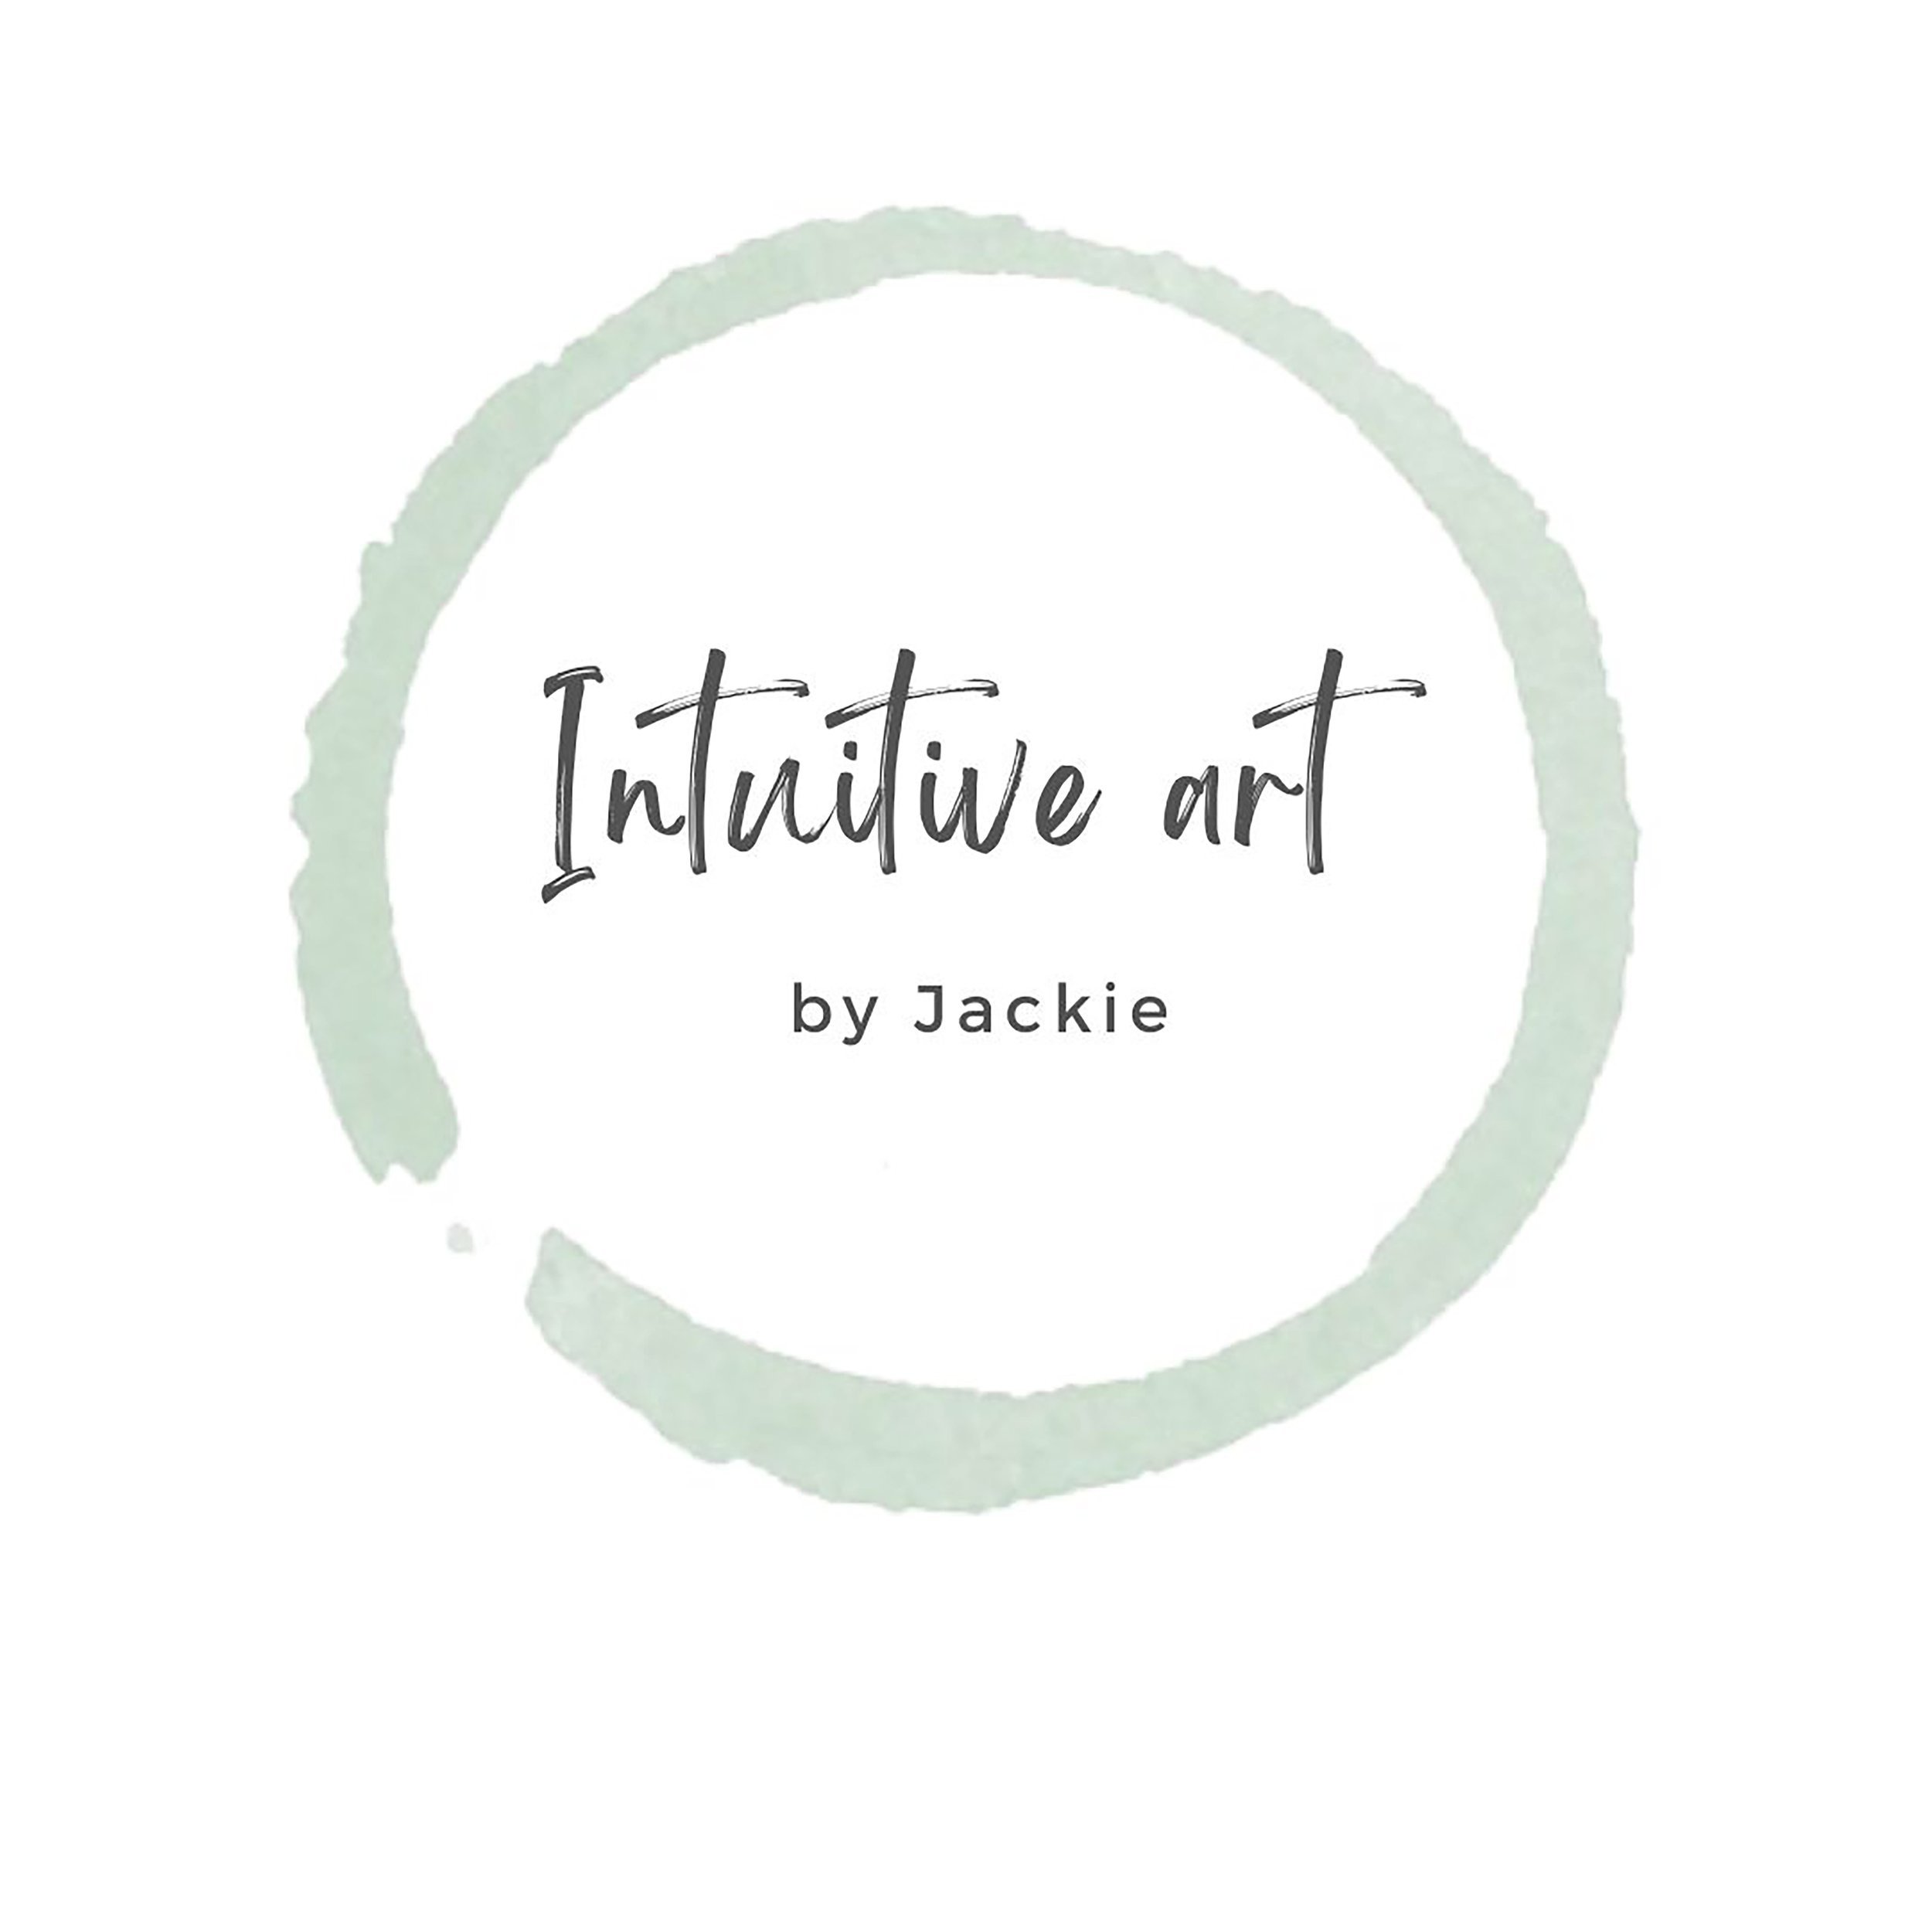 Intuitive art by Jackie